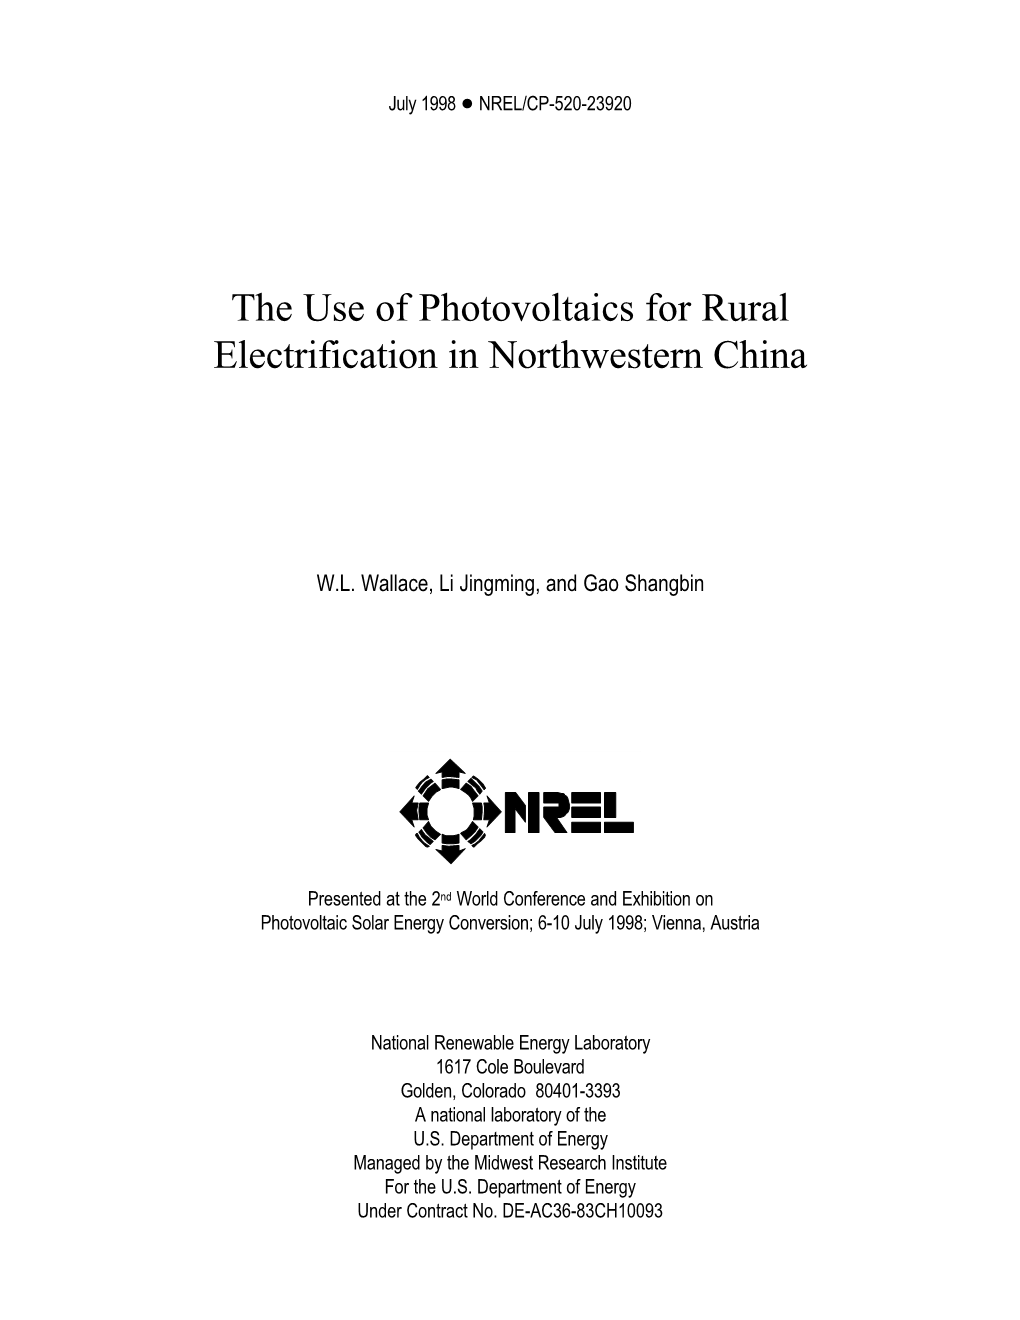 The Use of Photovoltaics for Rural Electrification in Northwestern China